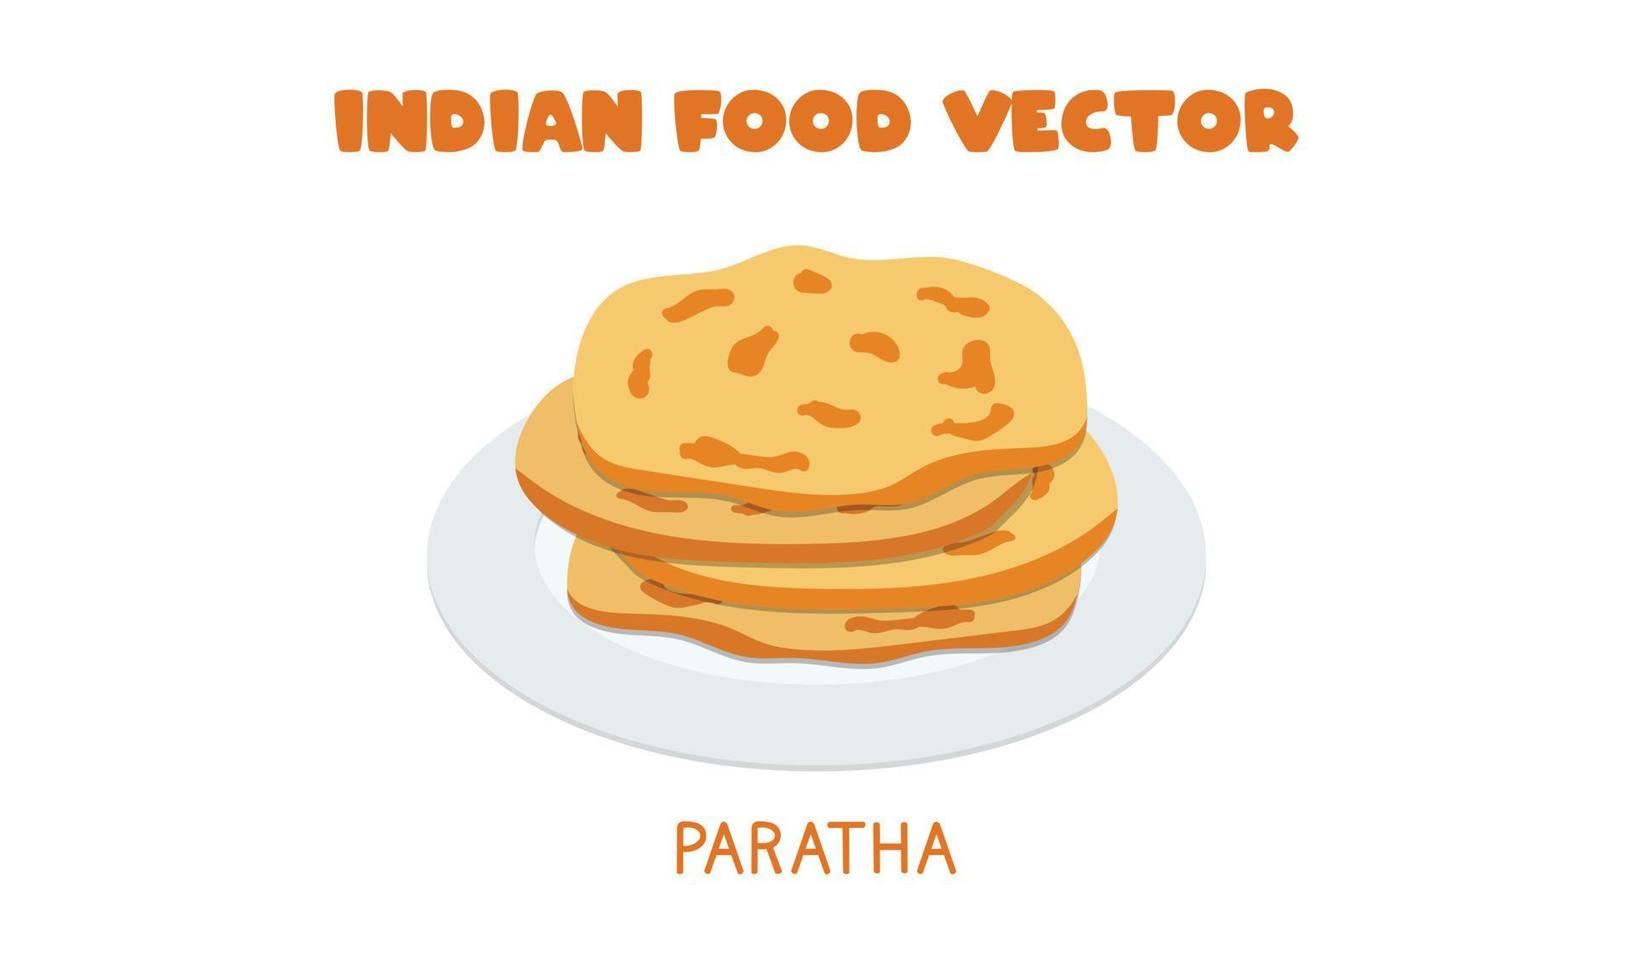 Indian Paratha - Indian flatbread Paratha flat vector illustration isolated on white background. Paratha clipart cartoon. Asian food. Indian cuisine. Indian food